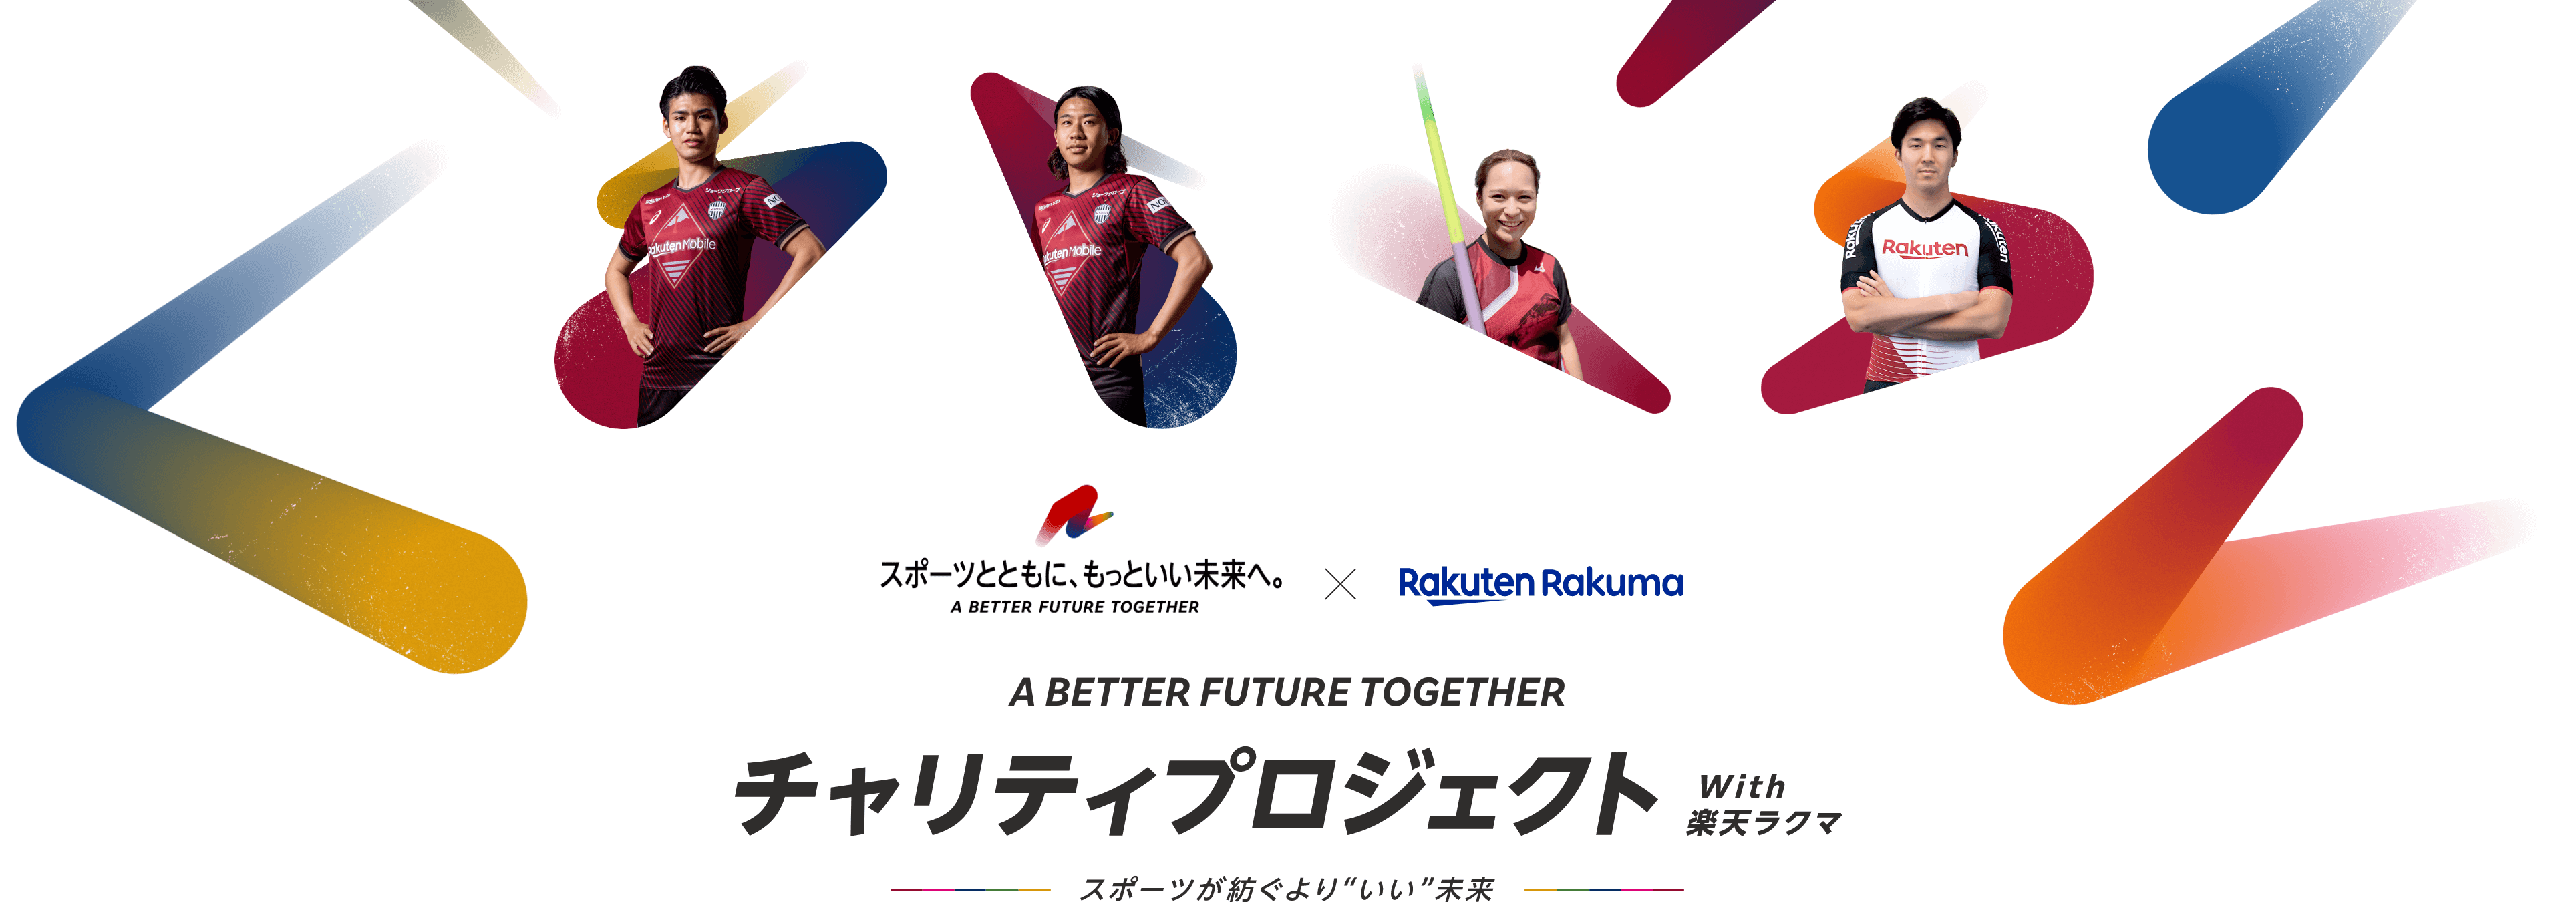 A BETTER FUTURE TOGETHER チャリティプロジェクト with 楽天ラクマ スポーツが紡ぐよりいい未来